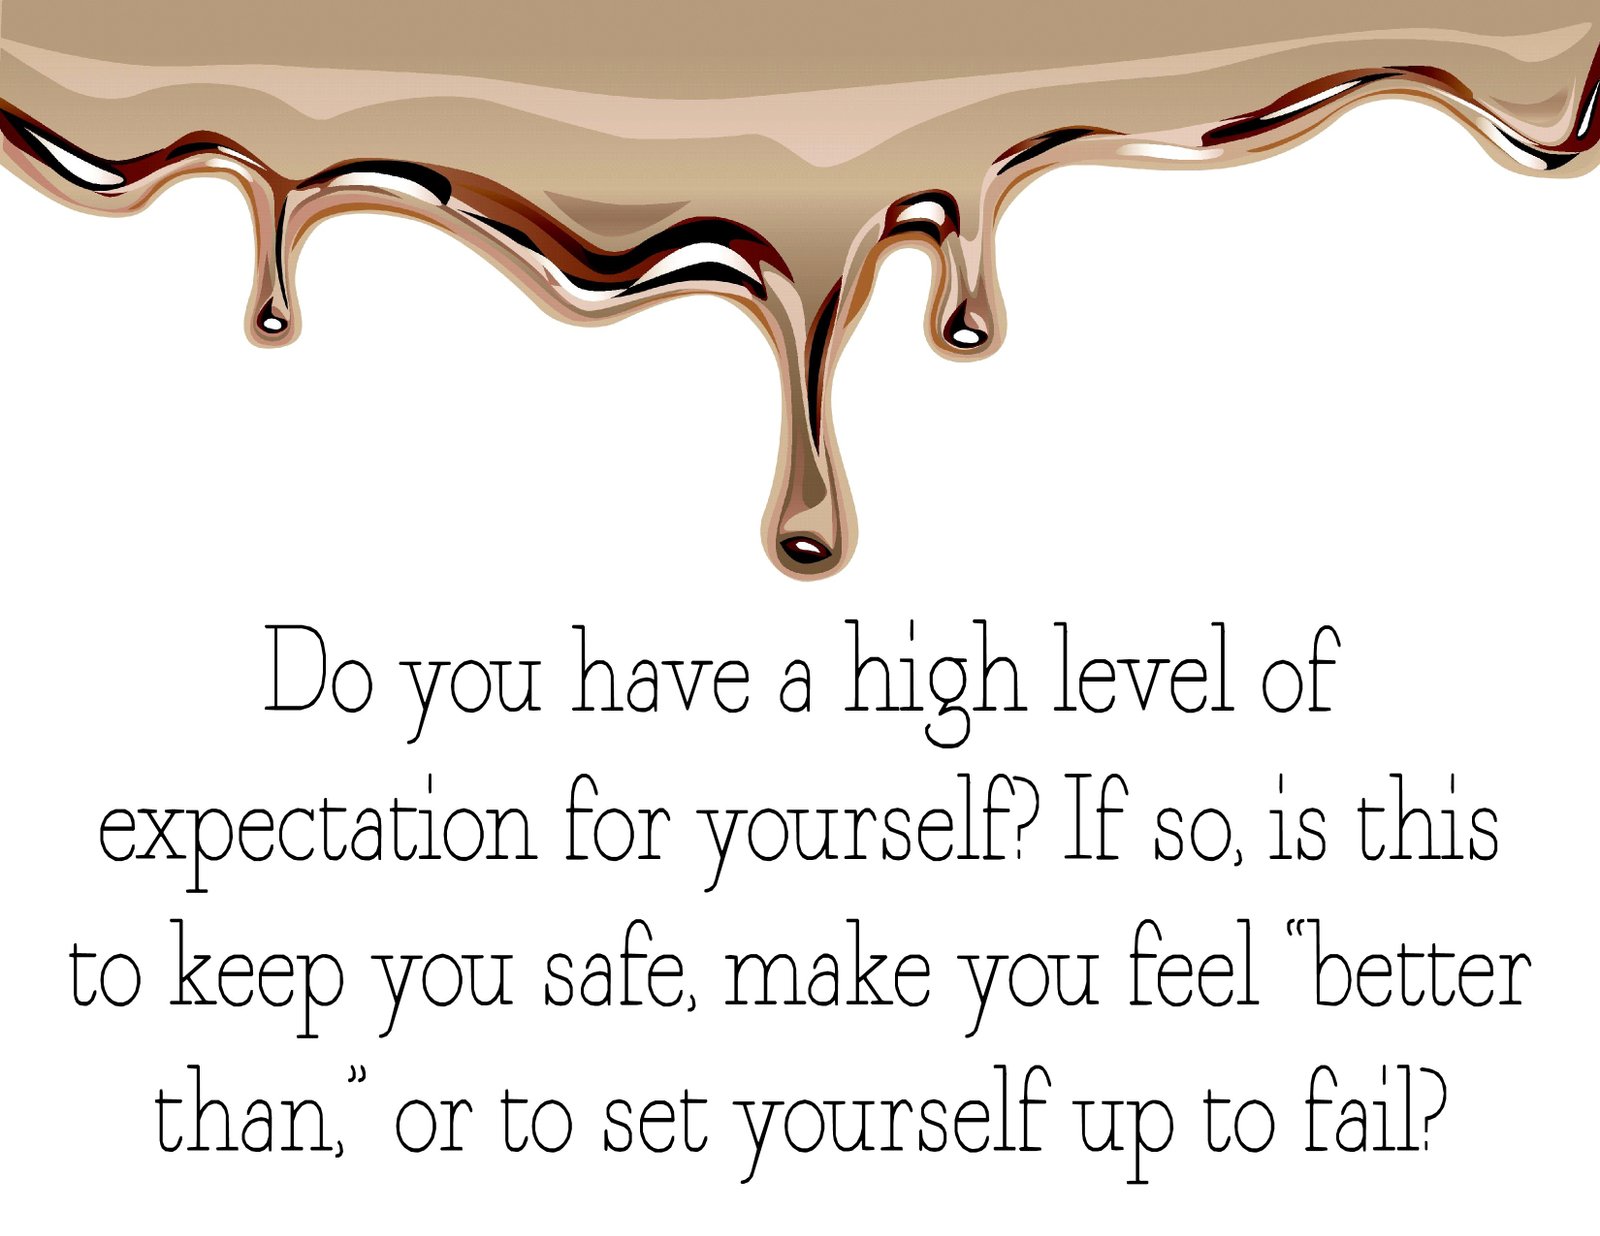 Do you have a high level of expectation for yourself